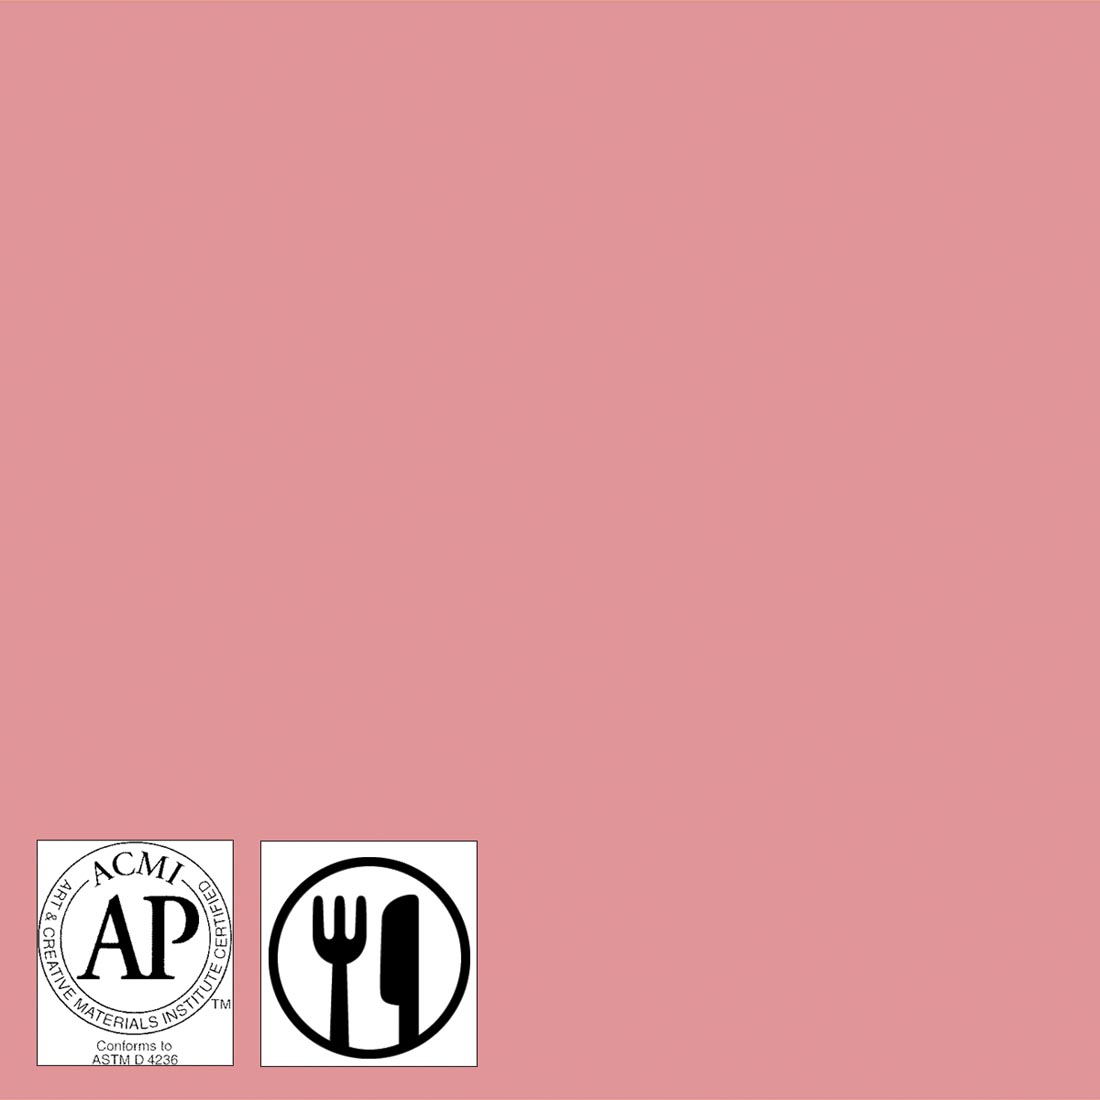 Color sample of Mayco Foundations Series Gloss Glaze Pink with symbols for AP Seal and food safe